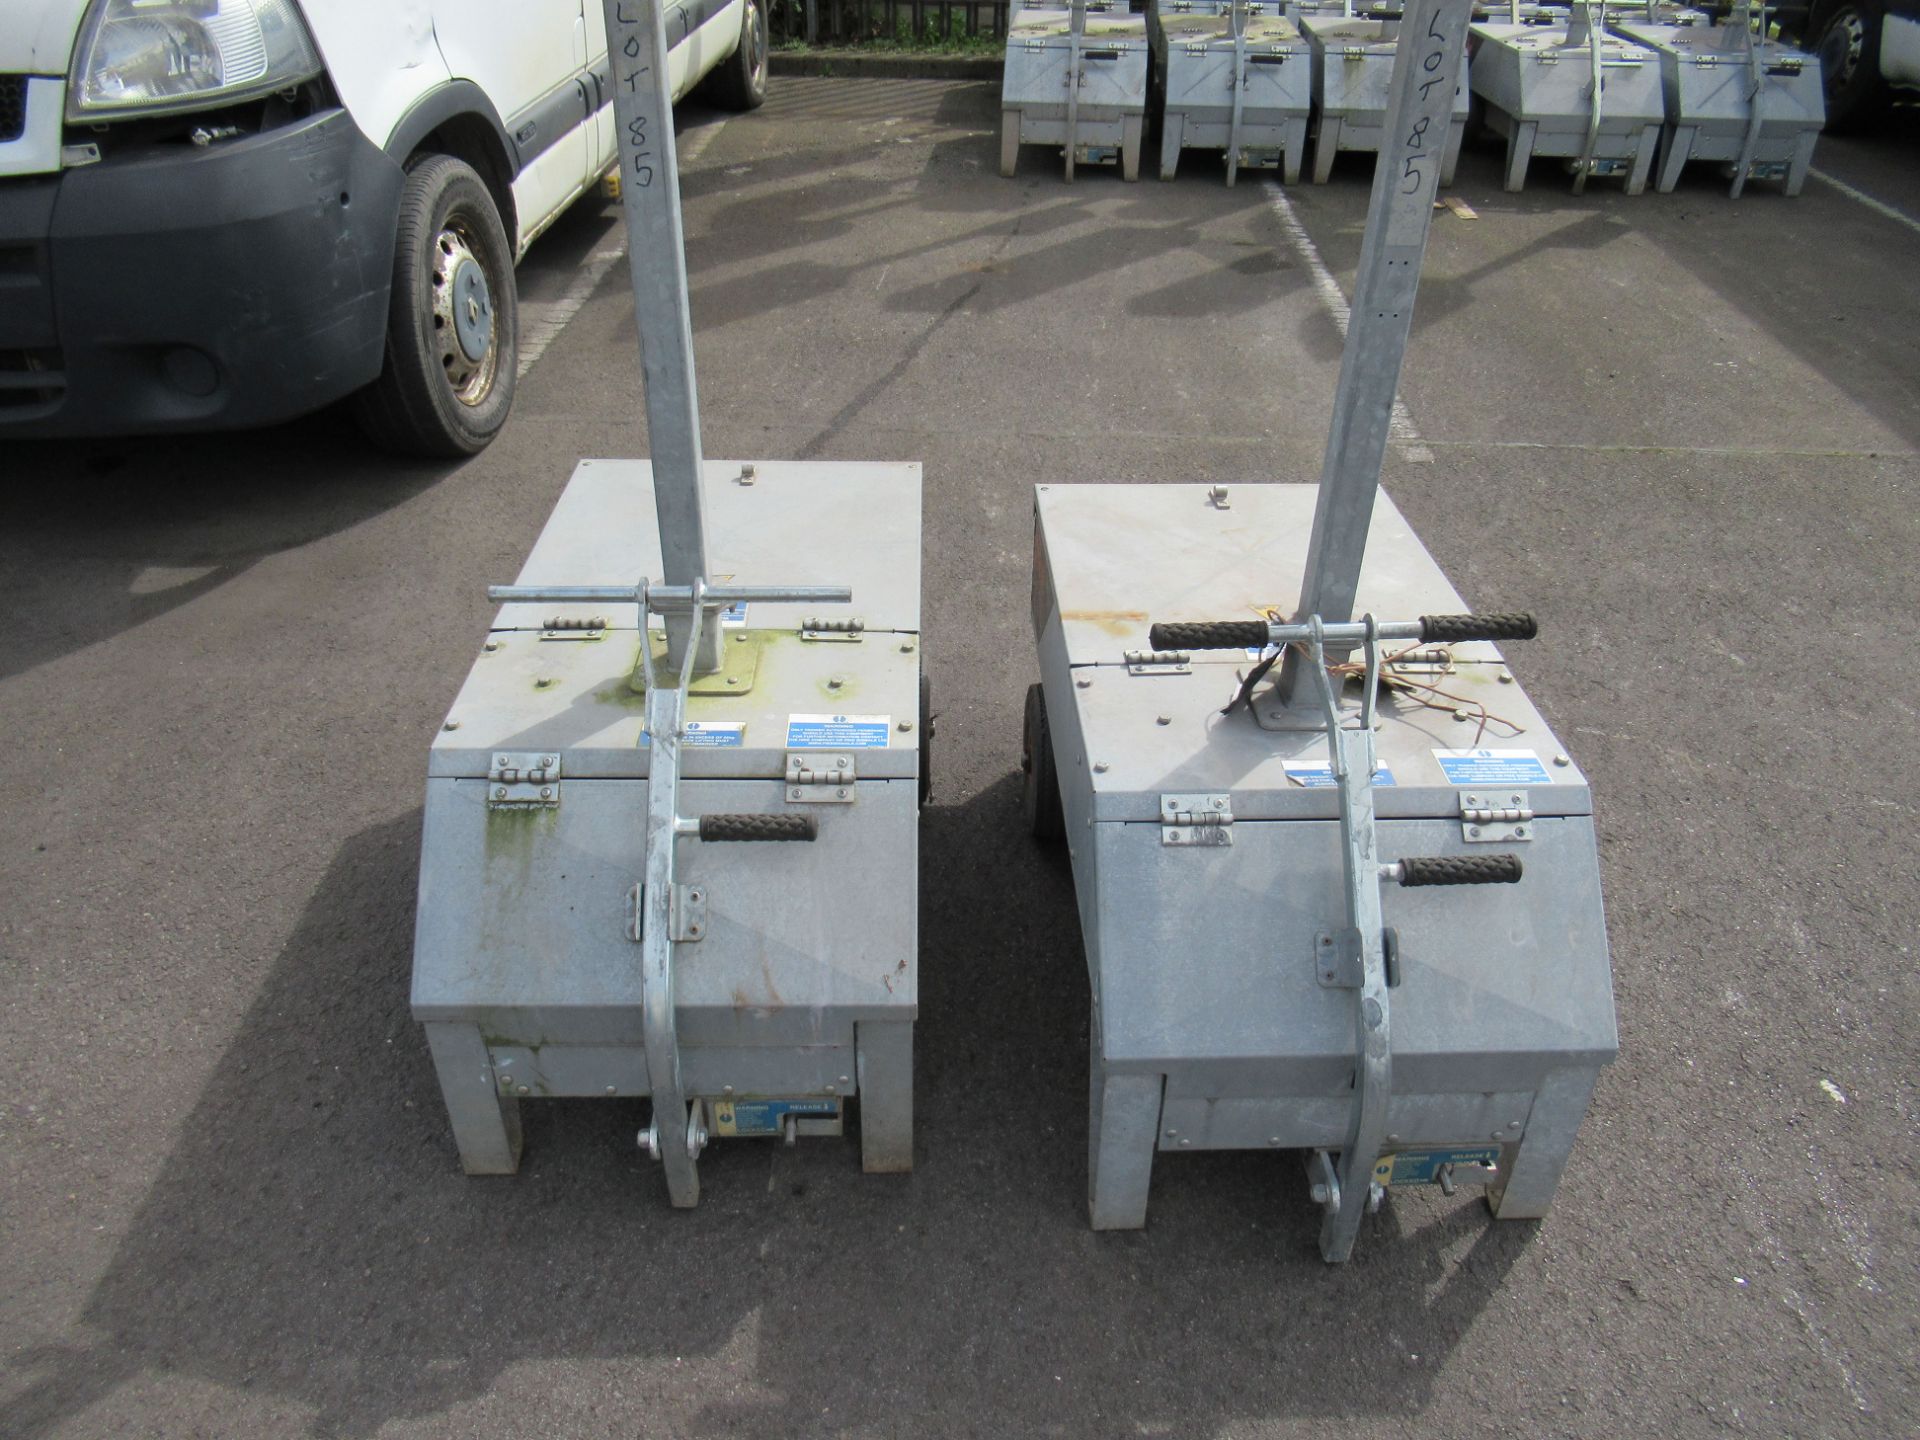 A Pair of Pike Signals Ltd "Vehicle" Battery Powered Portable Traffic Light Units - Image 4 of 7